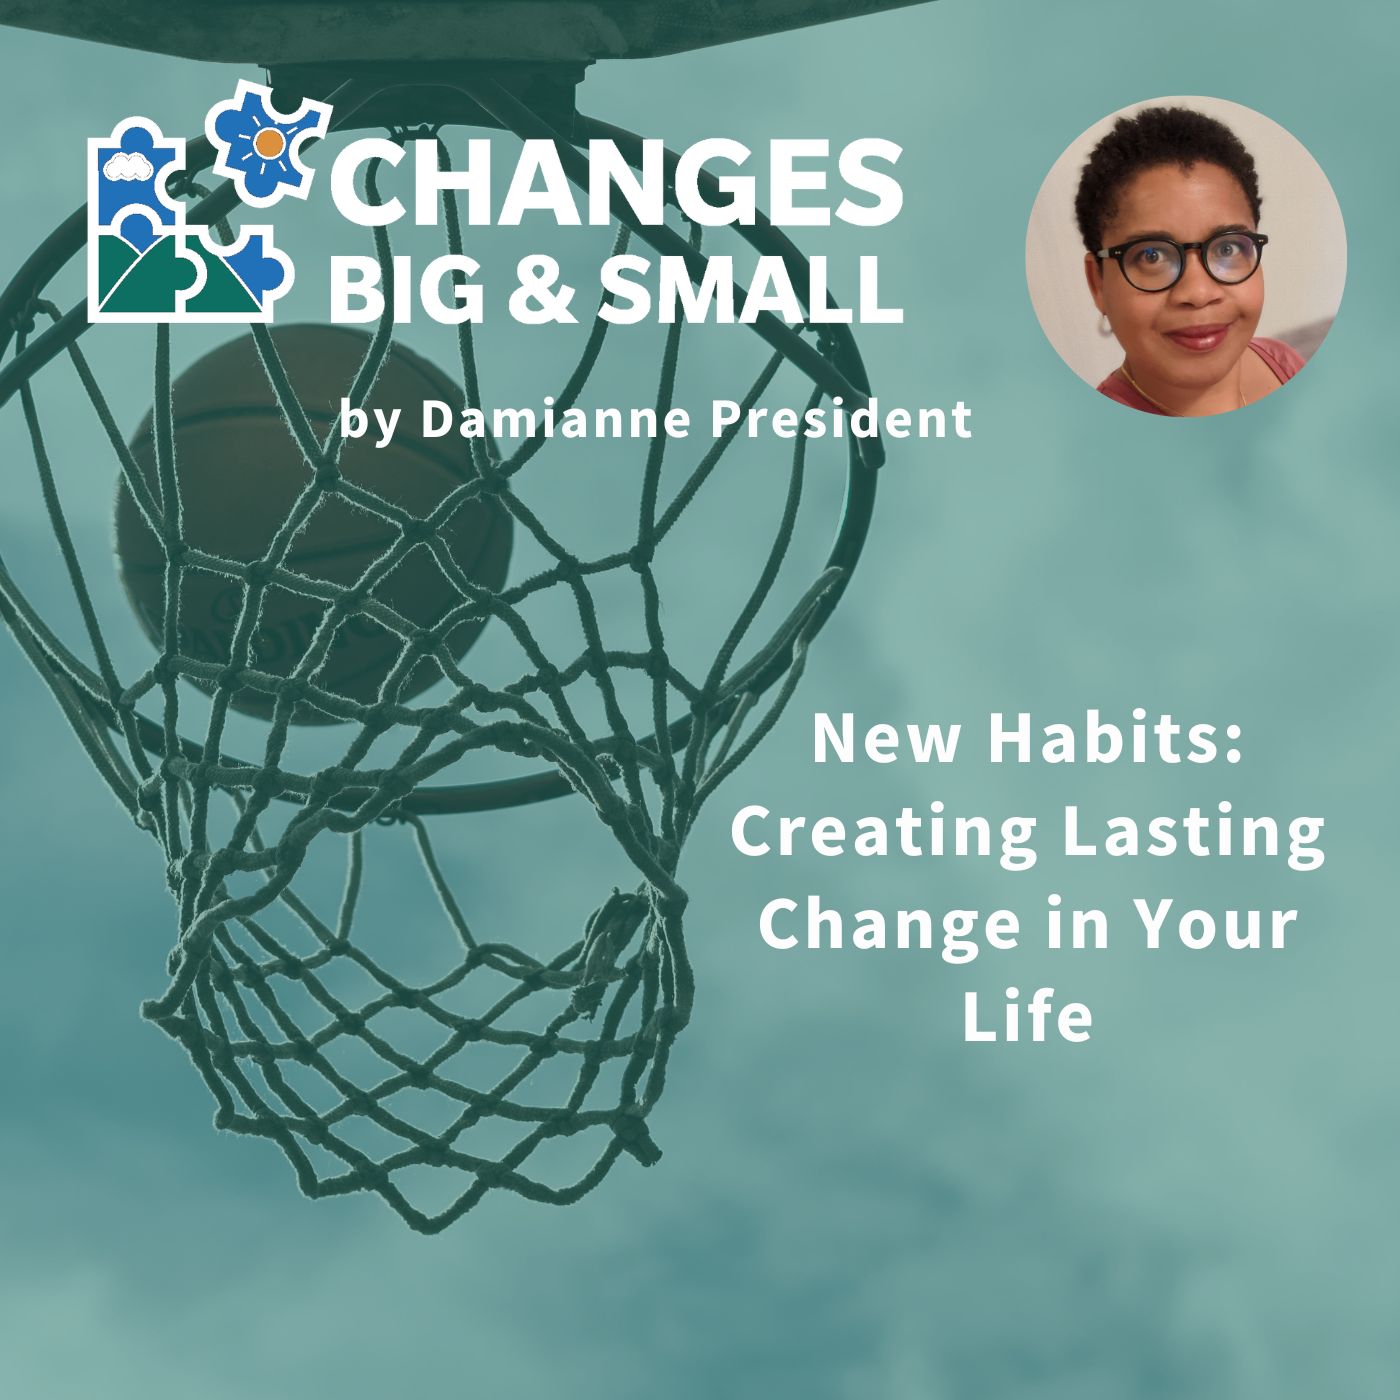 New Habits: Creating Lasting Change in Your Life